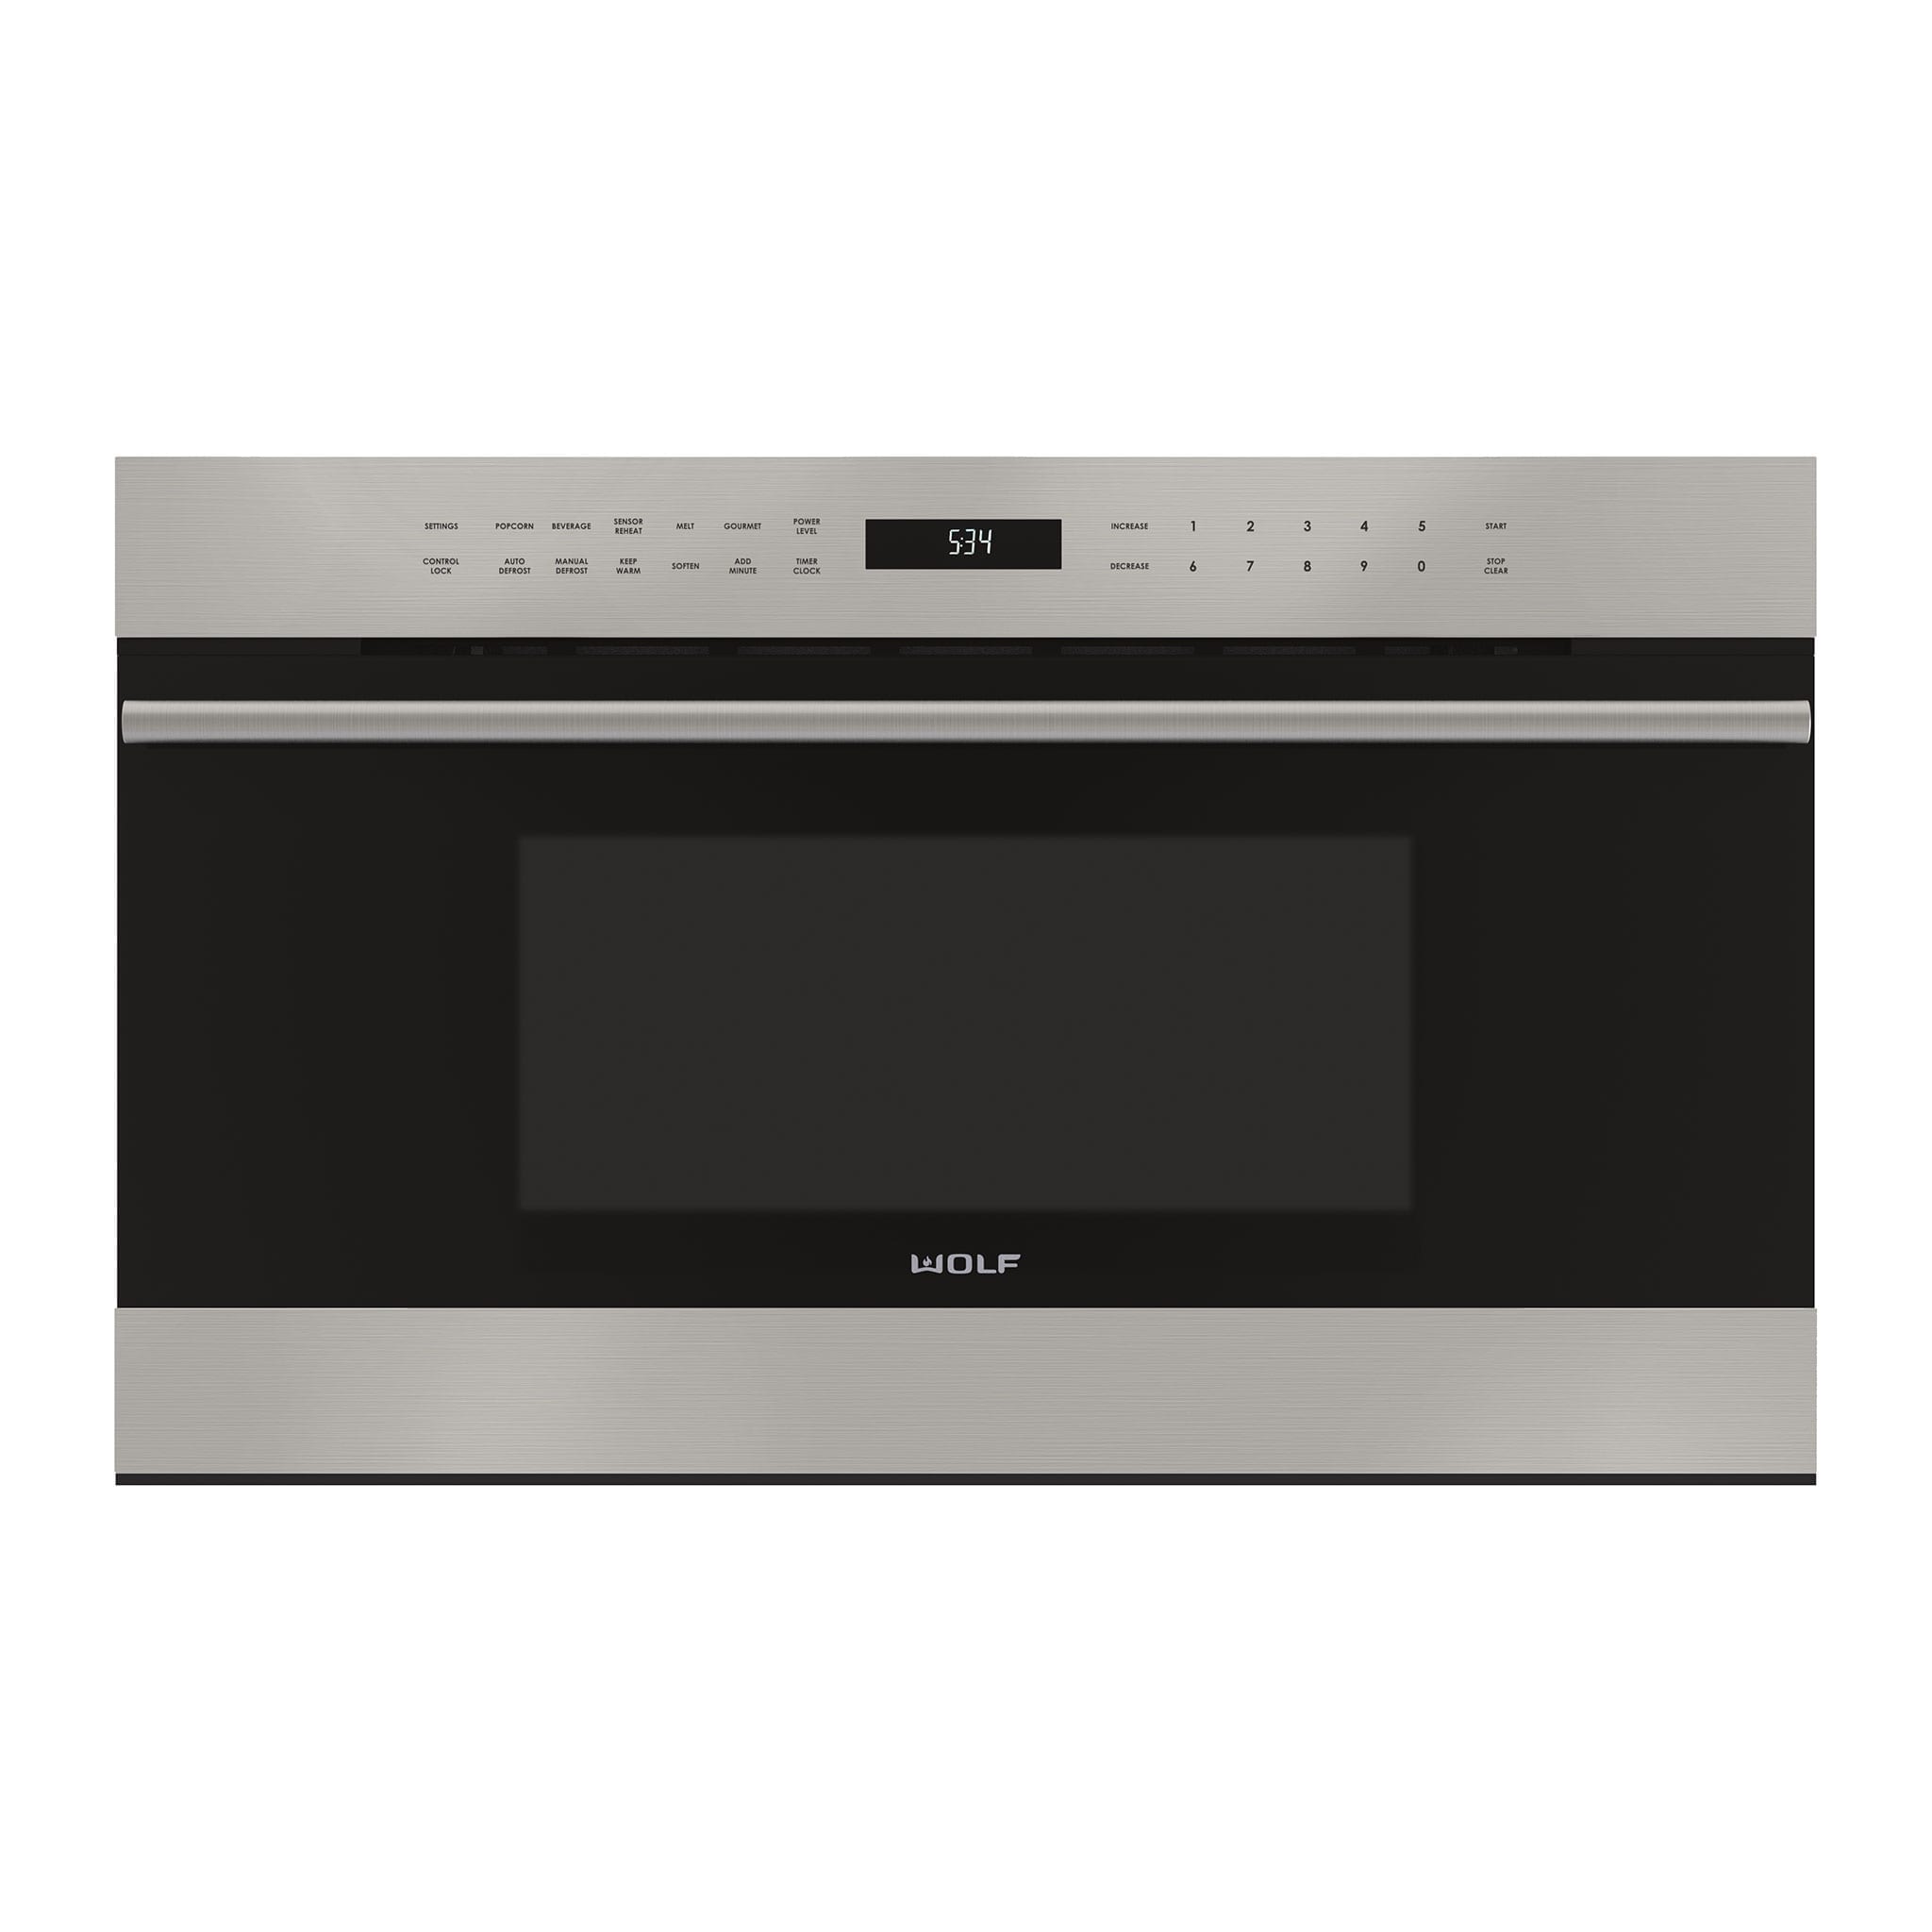 30" E Series Transitional Drop-Down Door Microwave Oven